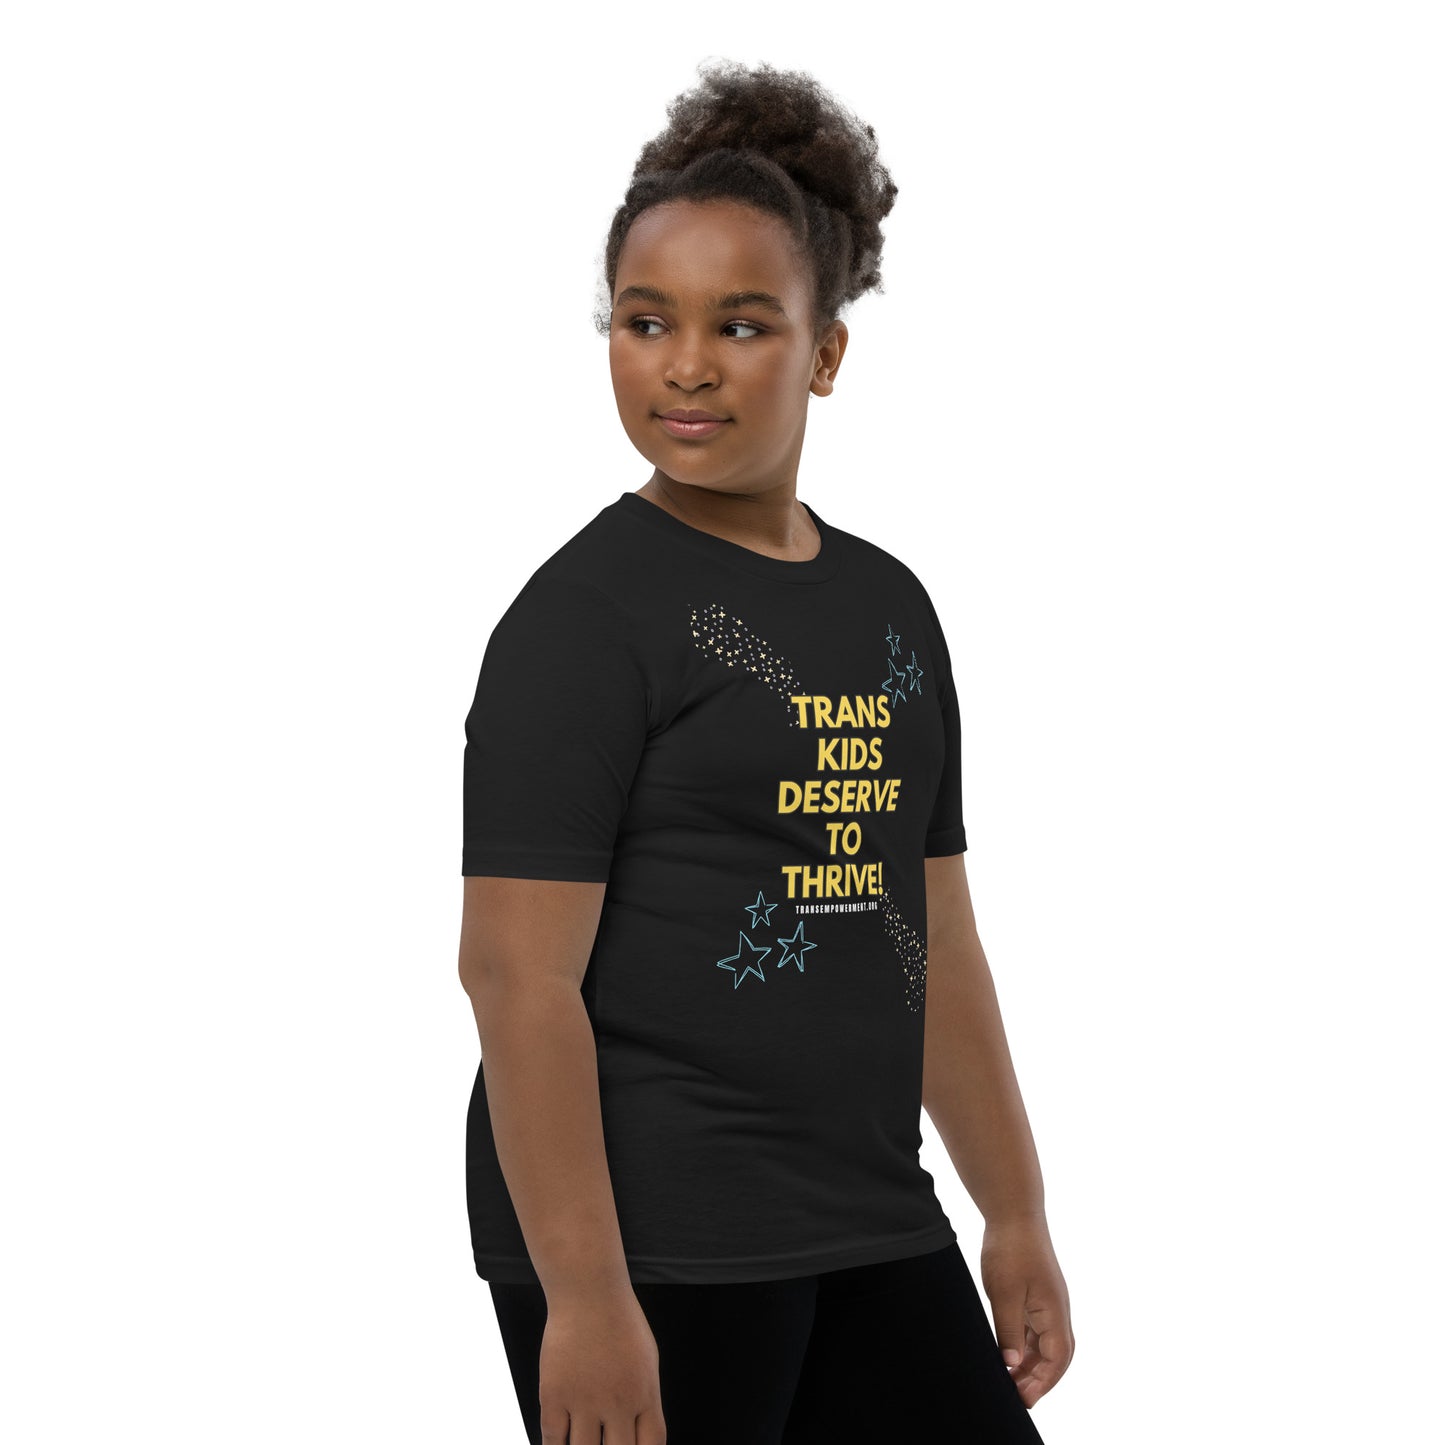 Trans Kids Deserve to Thrive-Youth Short Sleeve T-Shirt